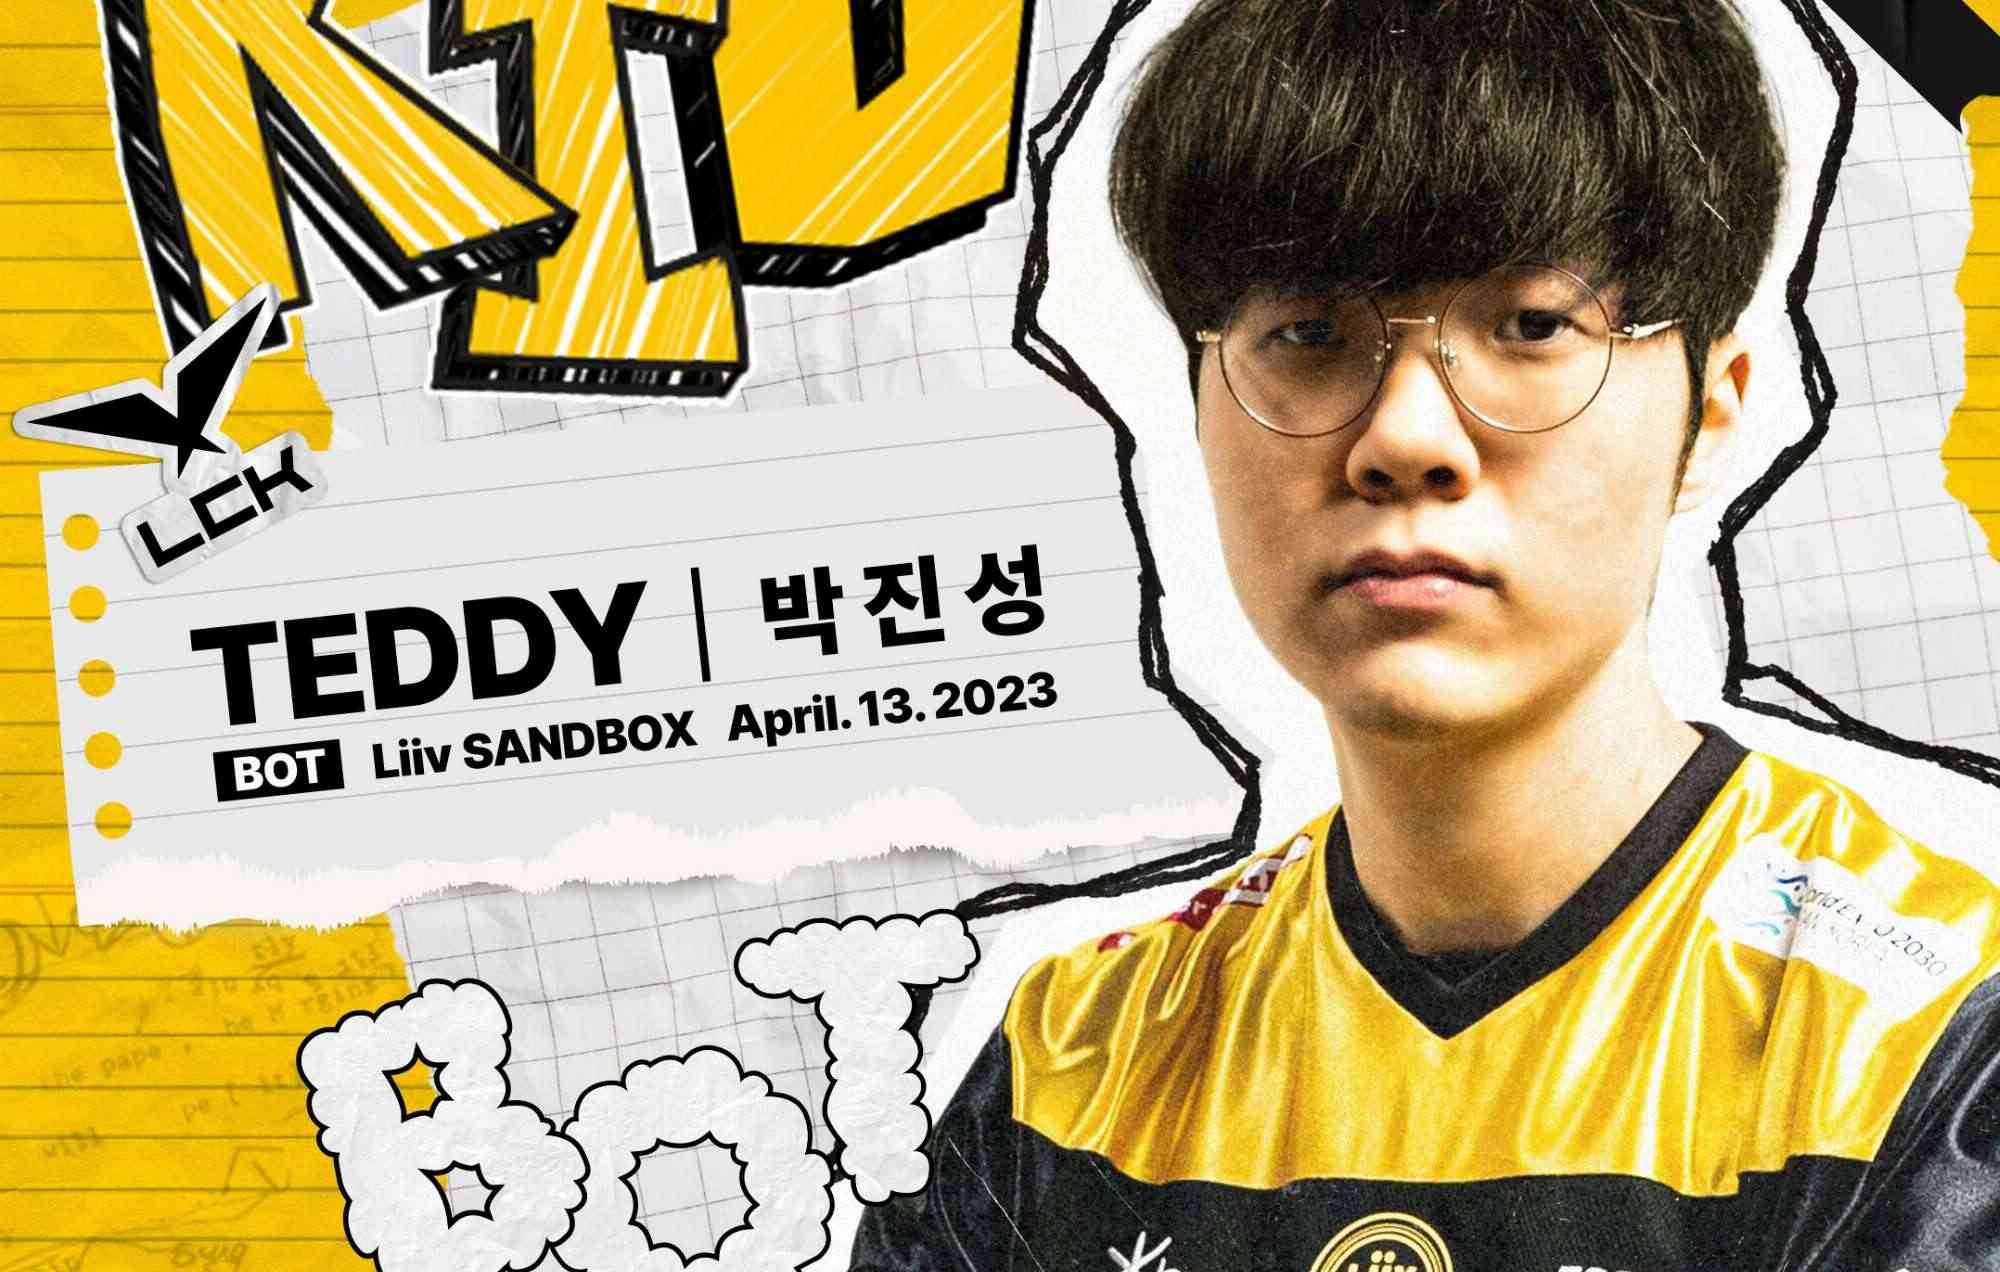 Dispelling rumors of retirement, Teddy returned to the LCK after a season of absence